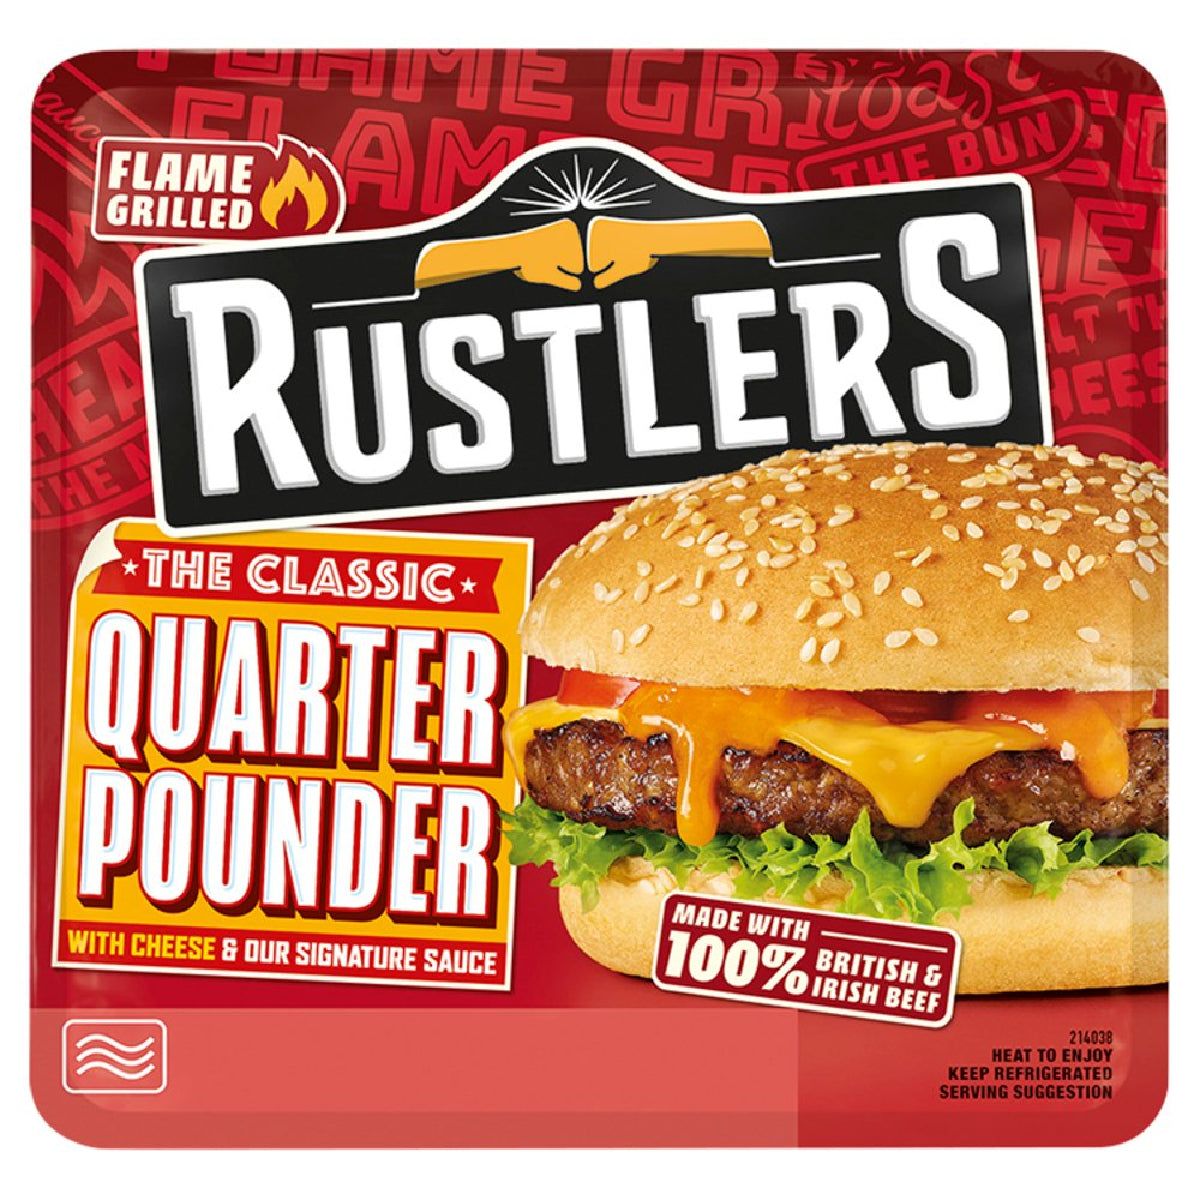 Rustlers - The Classic Quarter Pounder with Cheese & Our Signature Sauce - 190g - Continental Food Store